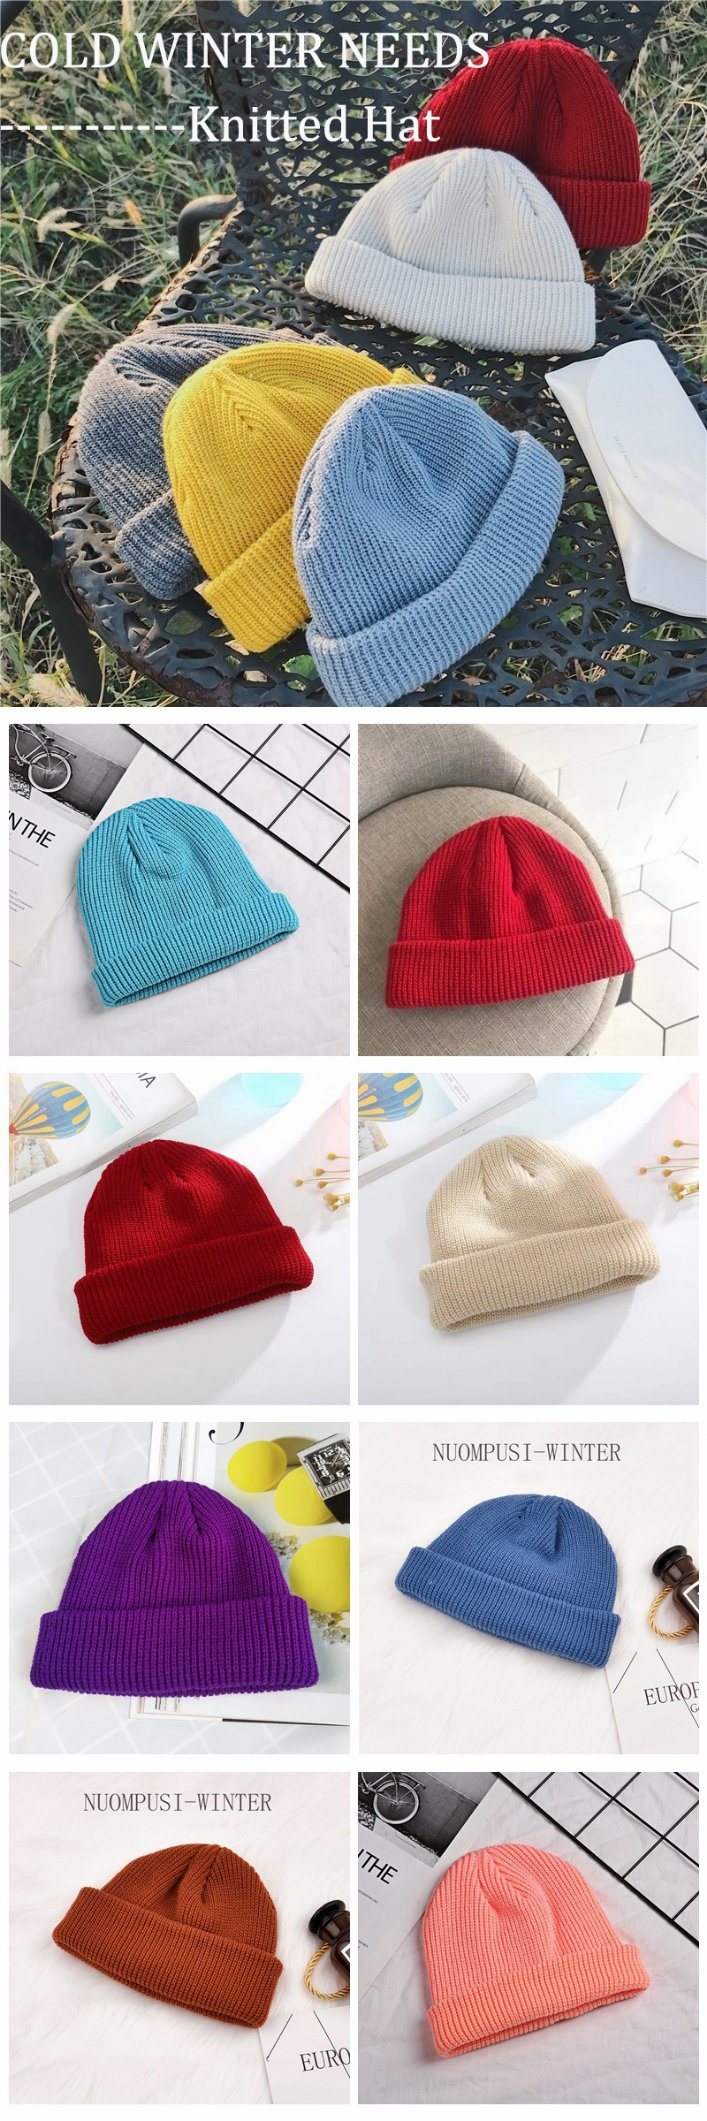 Wholesale Gold Supplier Custom Knitted Hat for Girls